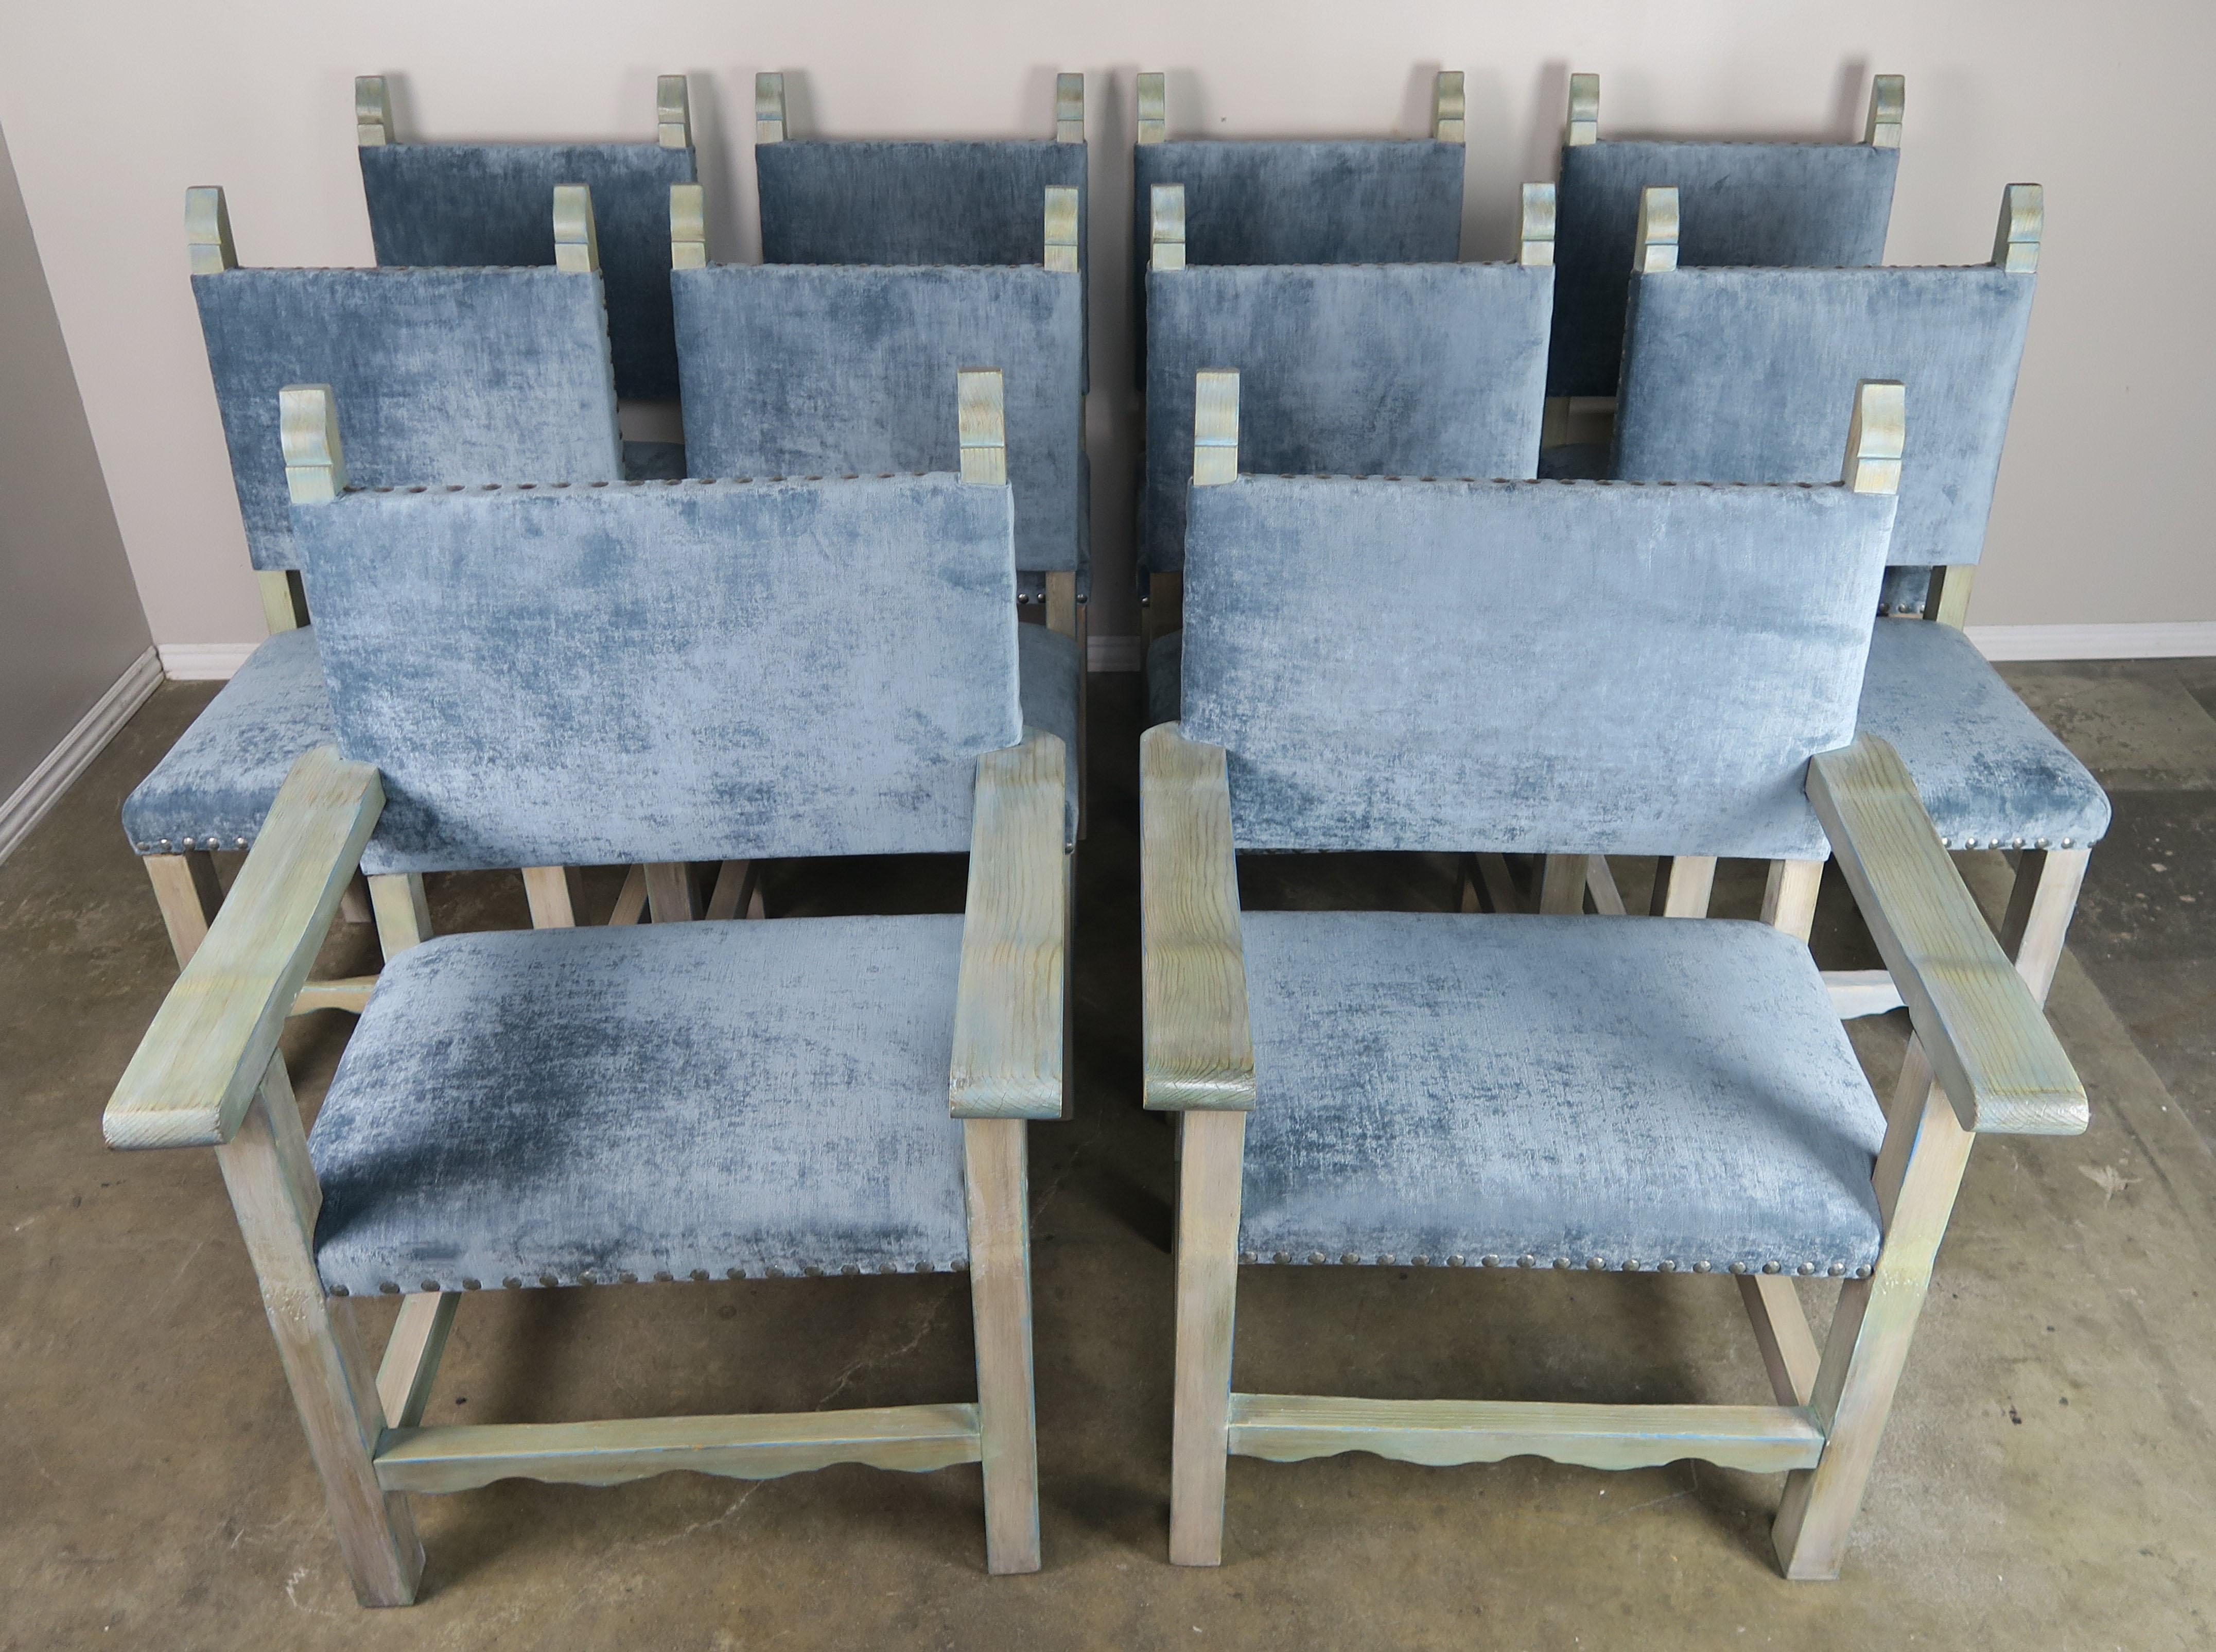 Set of (10) Spanish painted walnut dining chairs with aqua velvet upholstery and antique brass colored nailhead trim detail.
Measures: Armchairs 28 x 22 x 40 SH 19
Side chairs 19 x 19 x 40 SH 19.